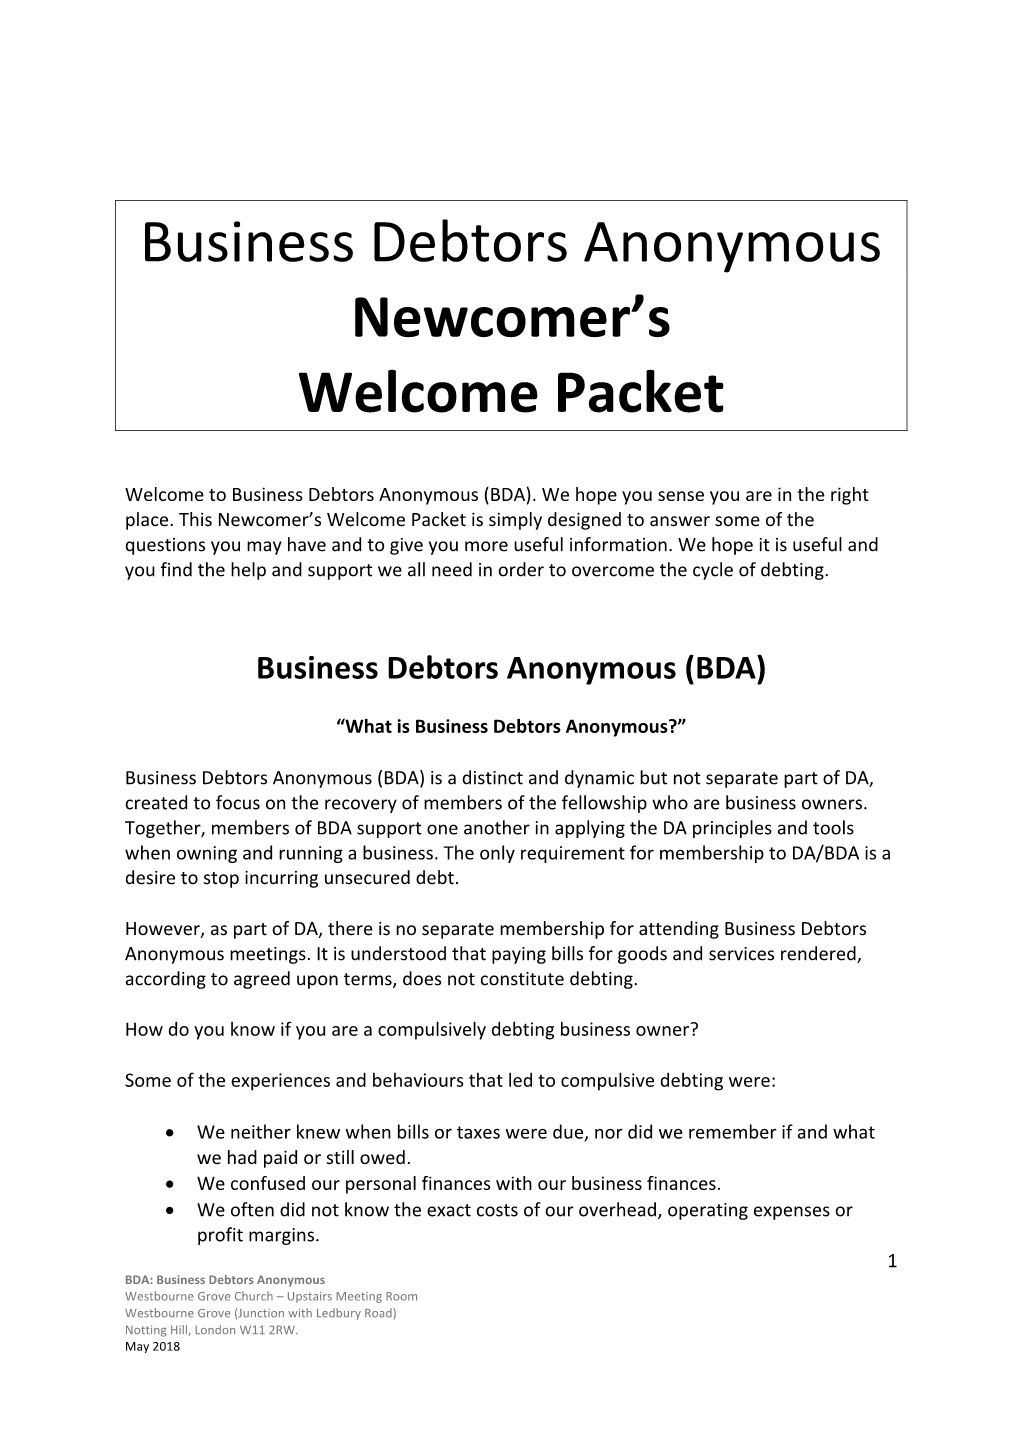 Business Debtors Anonymous Newcomer's Welcome Packet